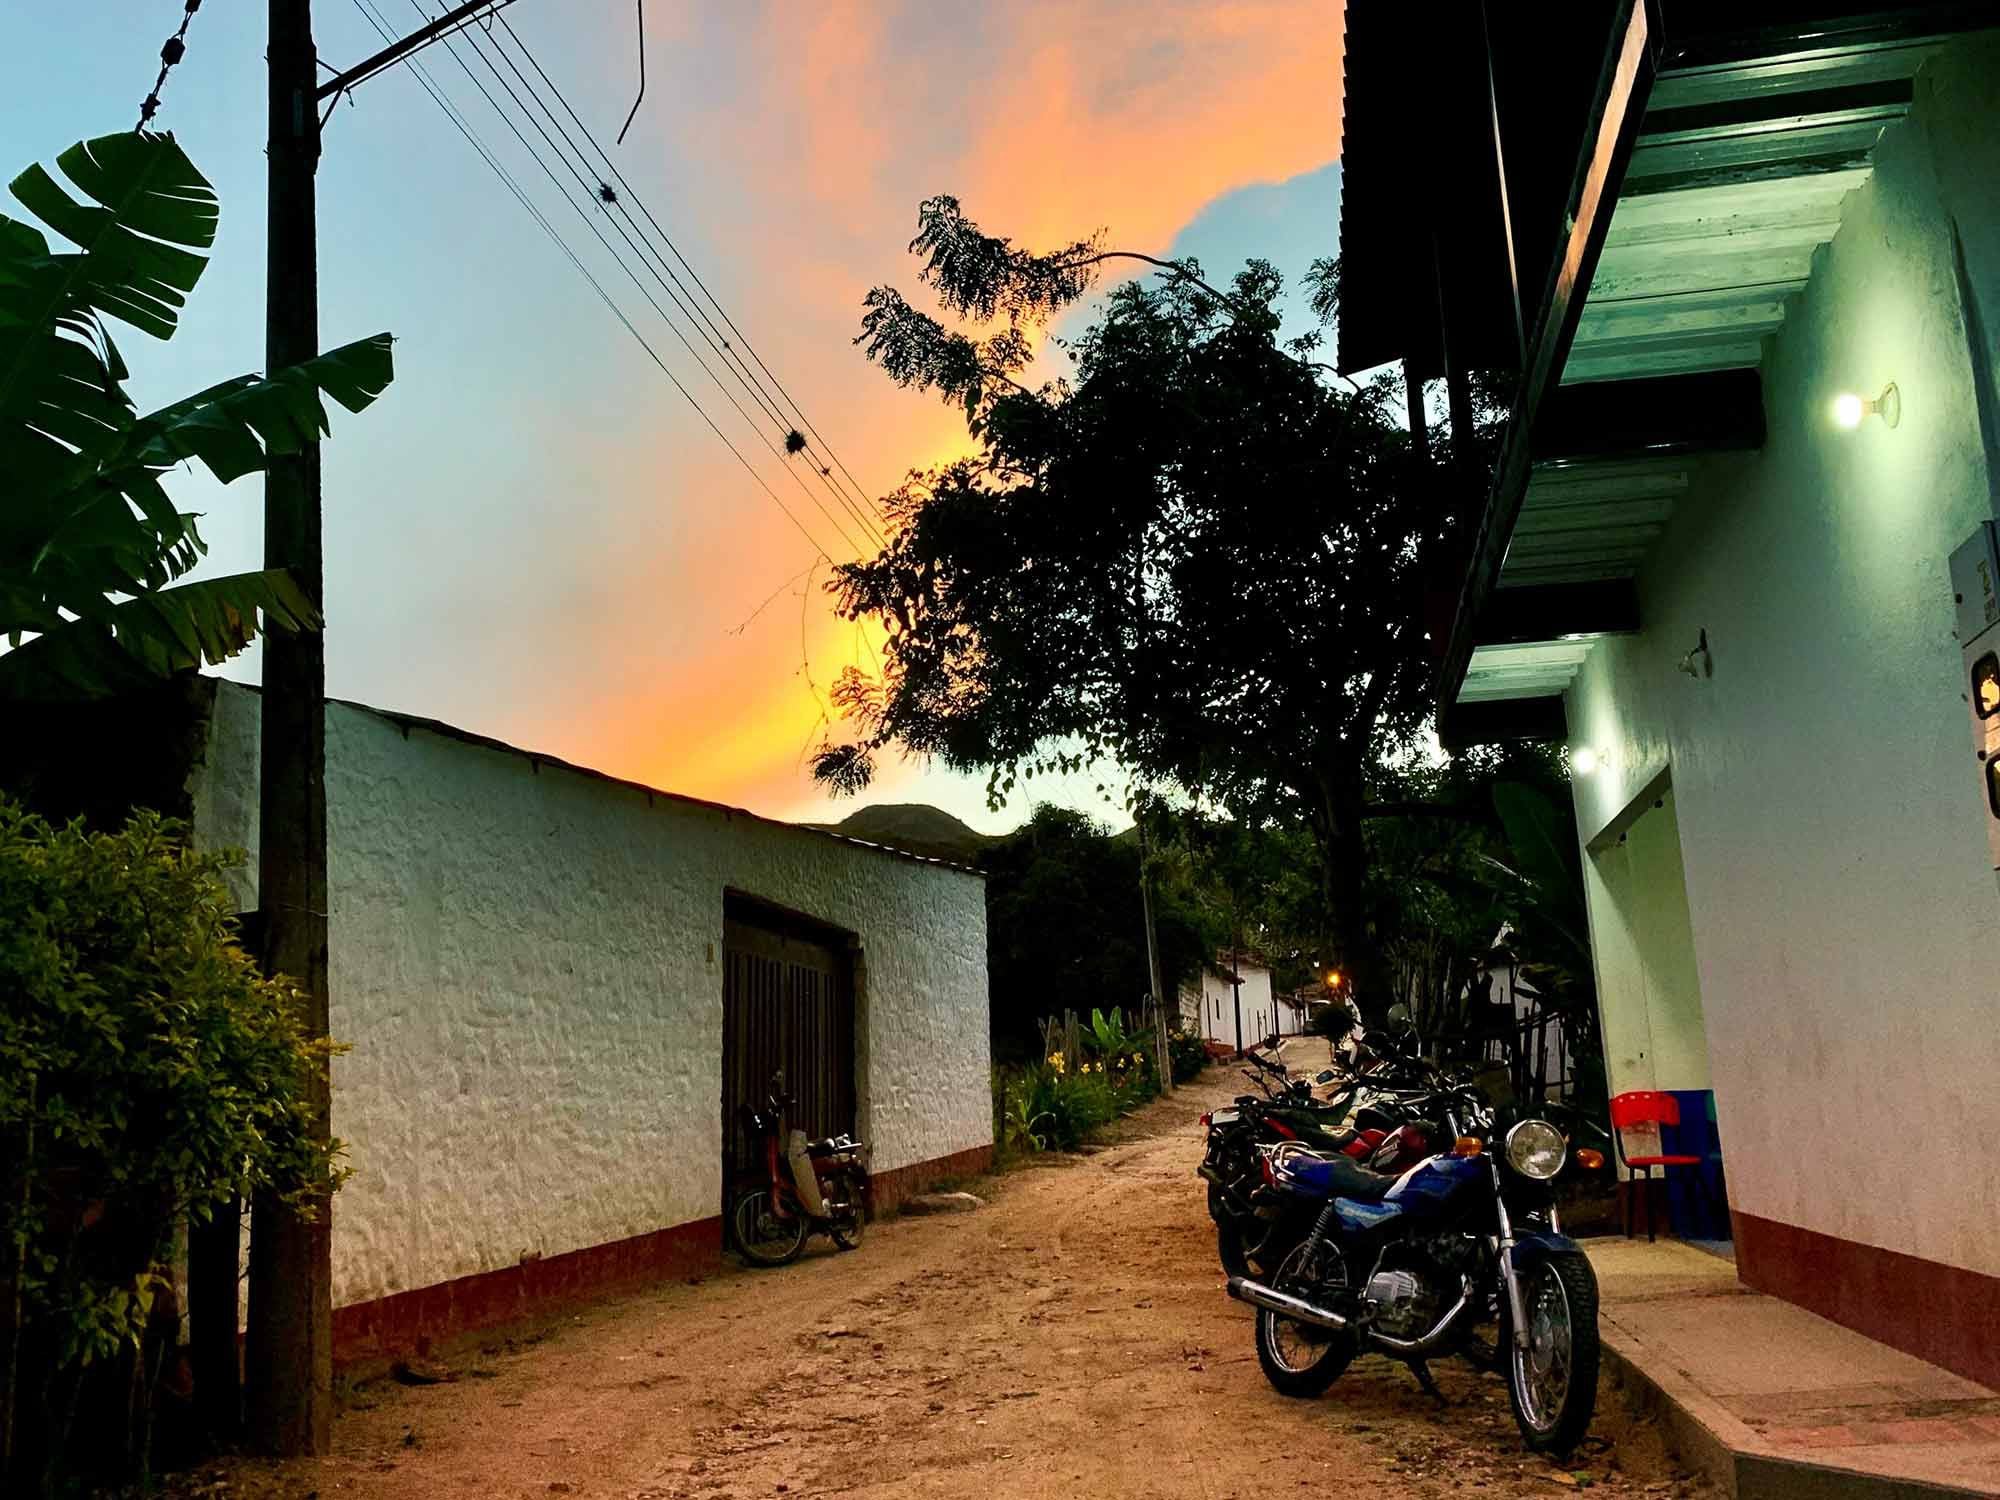 Sunsets and motorcycles on the outskirts of Playa de Belen, at a local pool hall near my guesthouse, Casa de Campo “El Placer” (highly recommended).